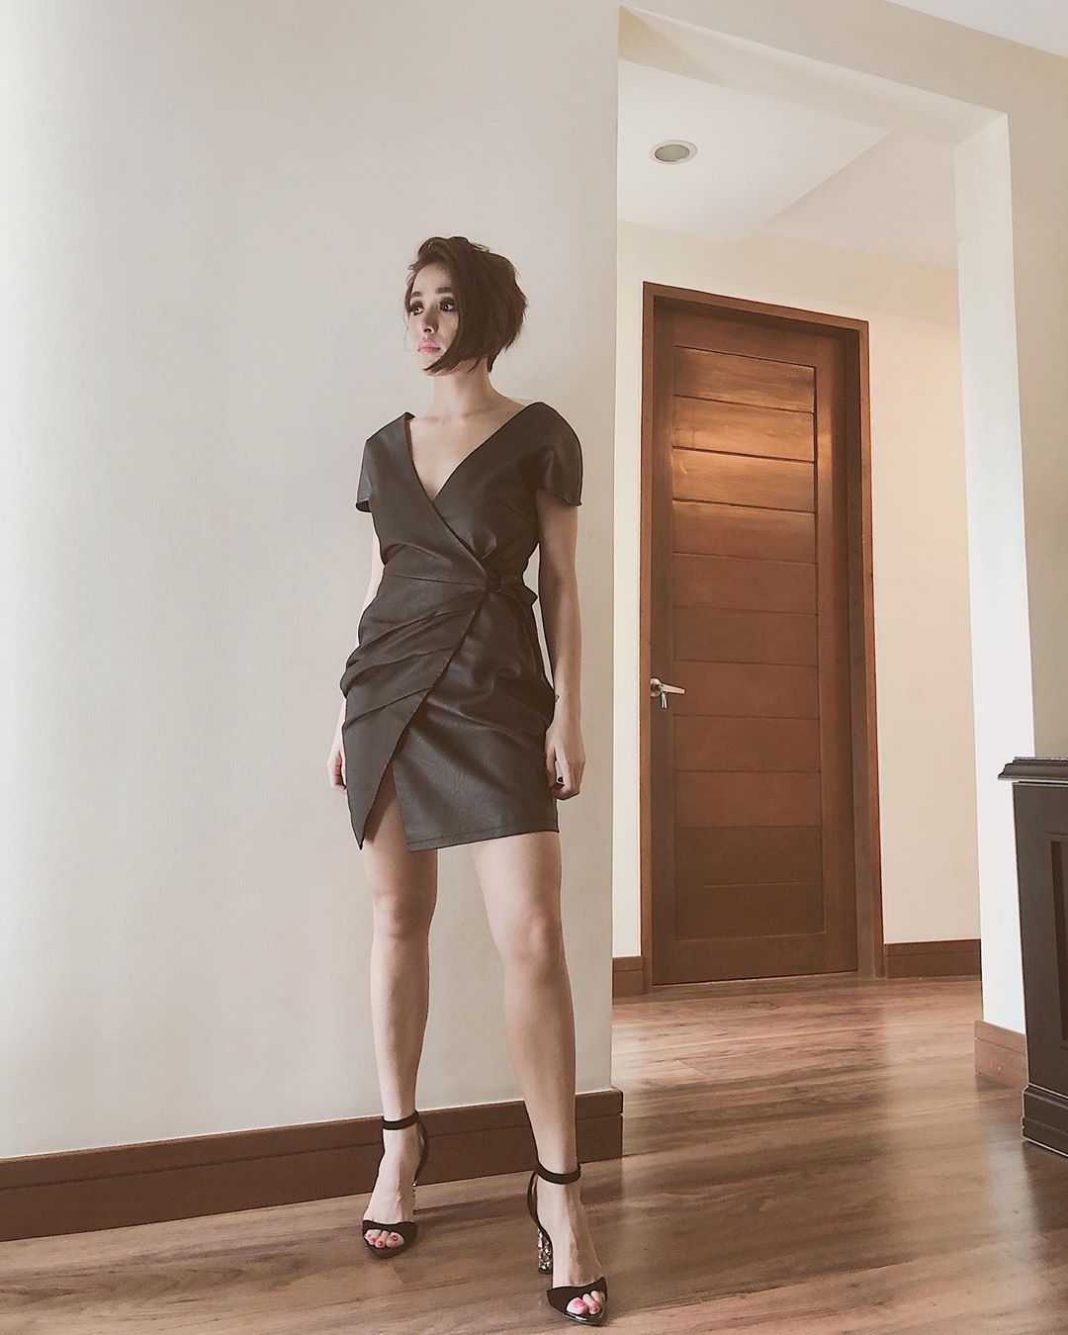 51 Cristine Reyes Nude Pictures Present Her Wild Side Glamor 20